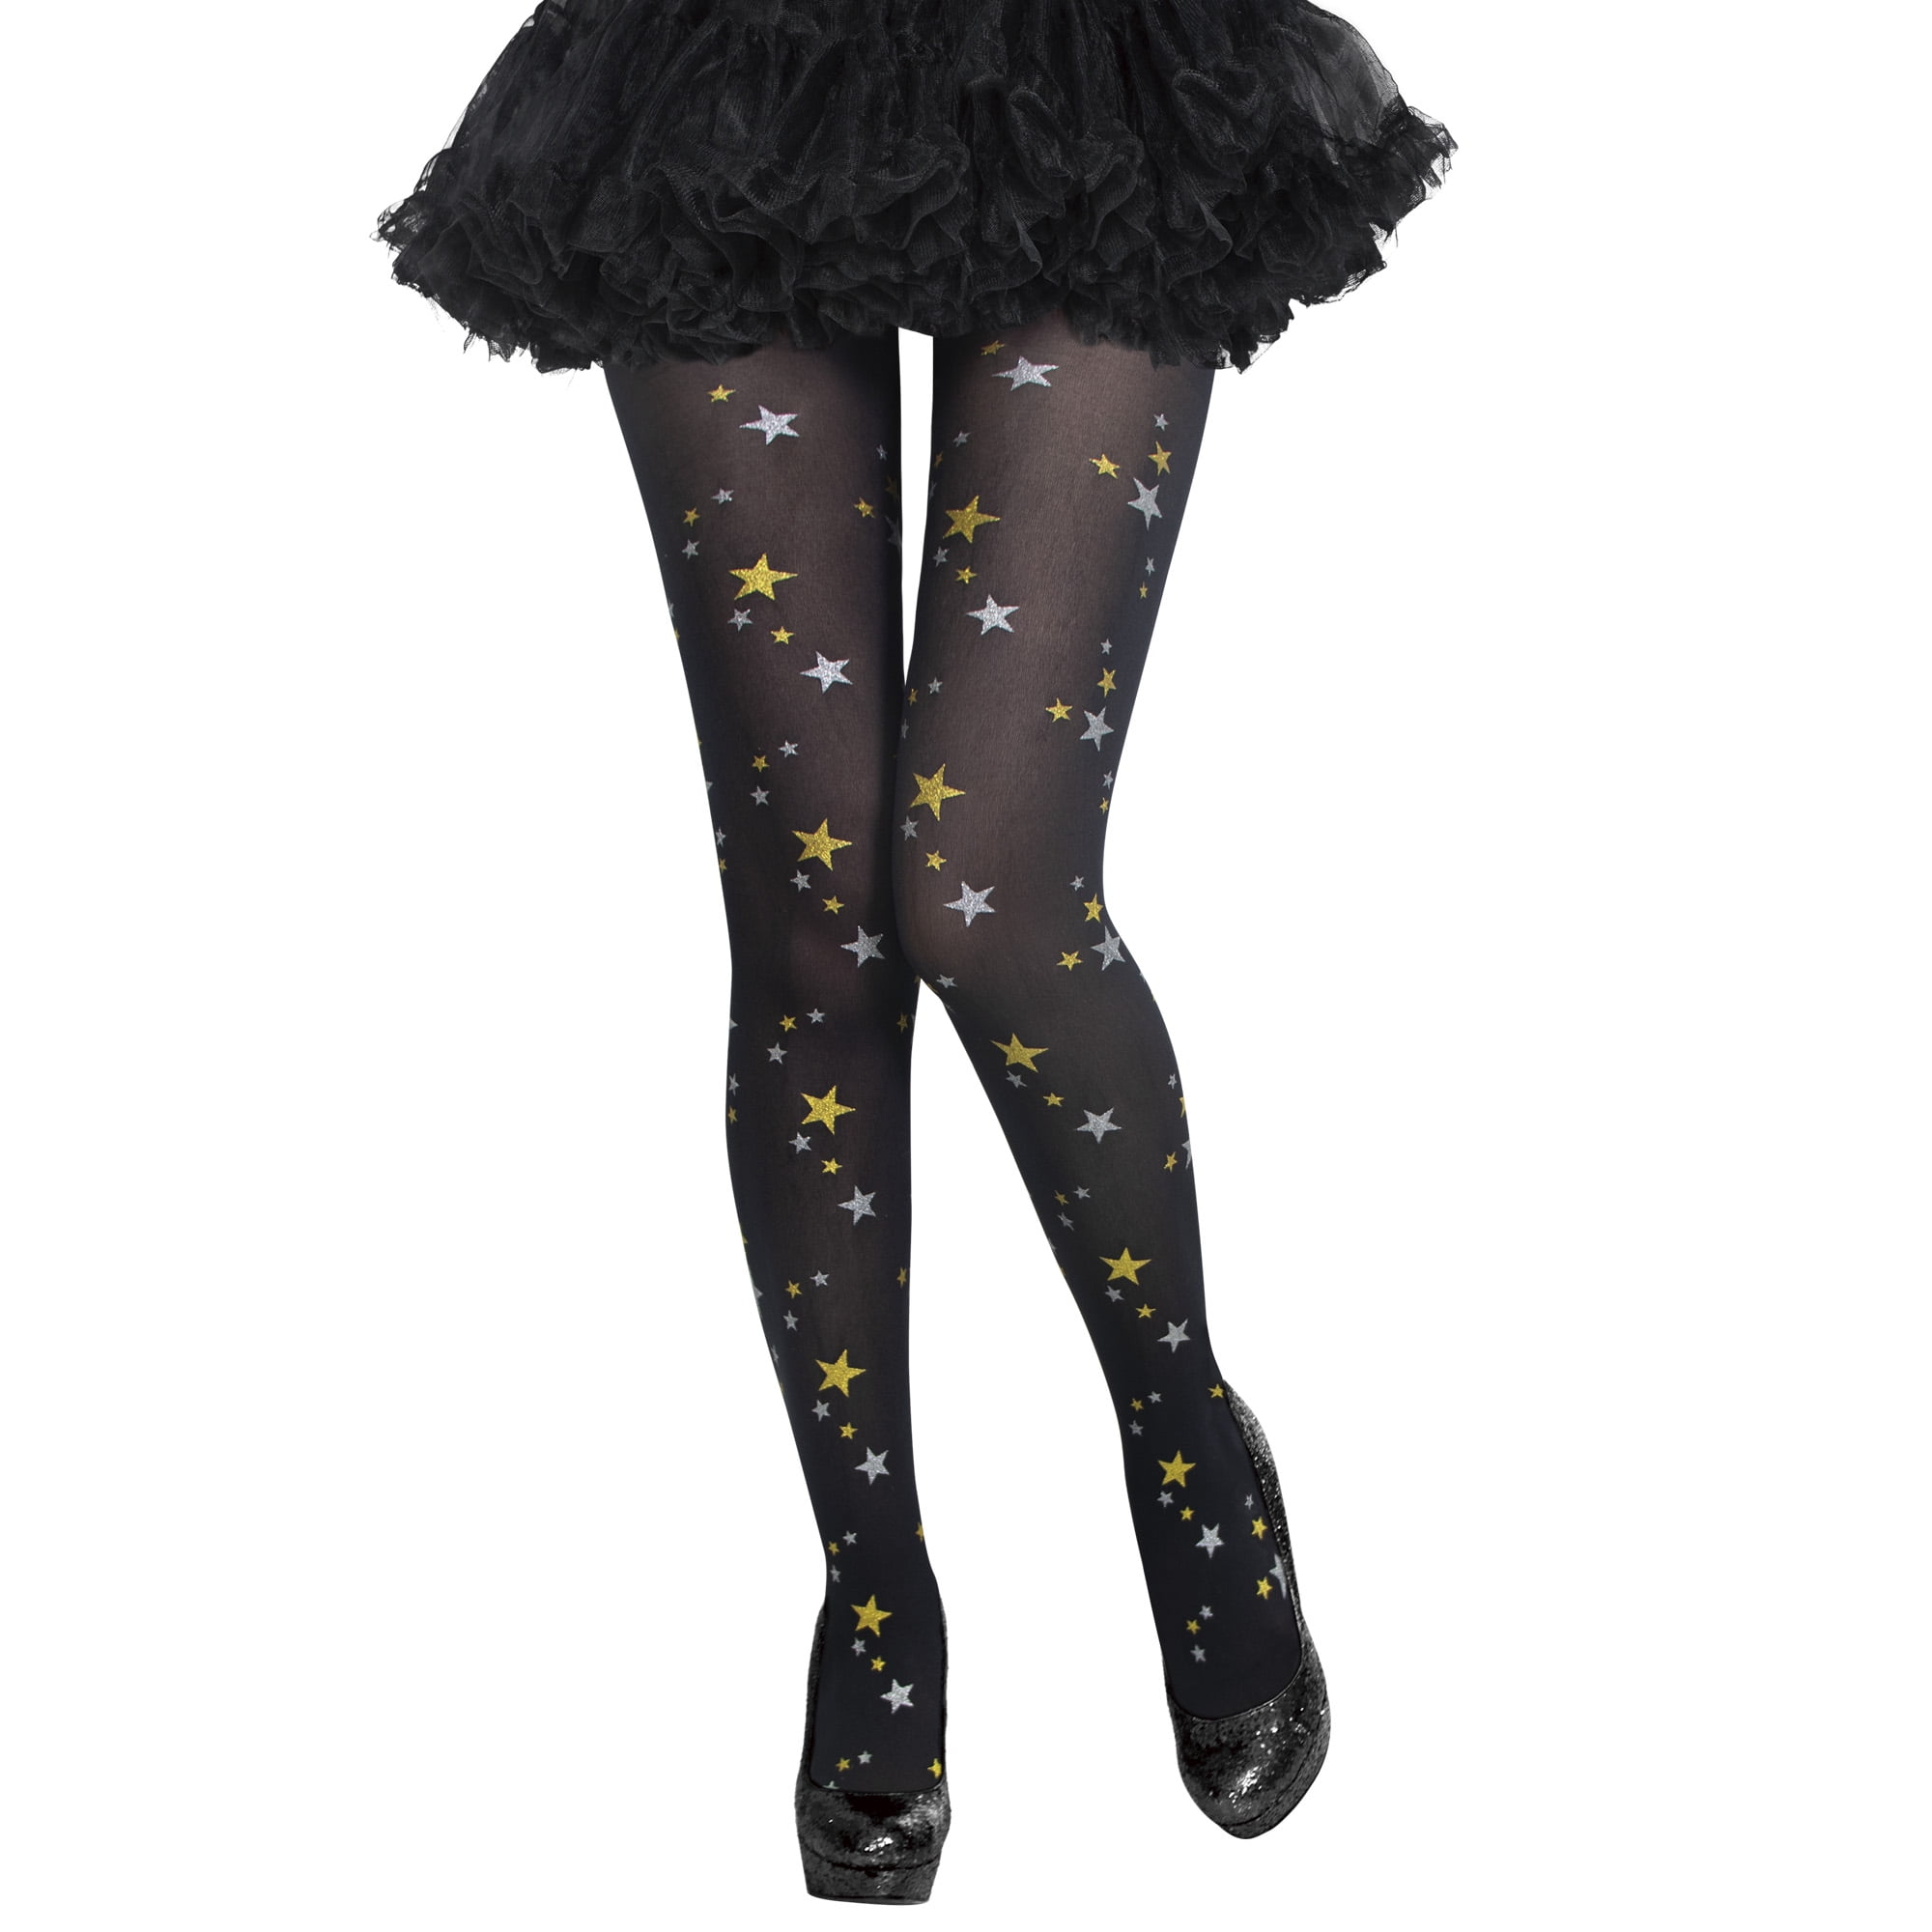 Halloween Glitter Star Black Tights for Female Adult Accessories